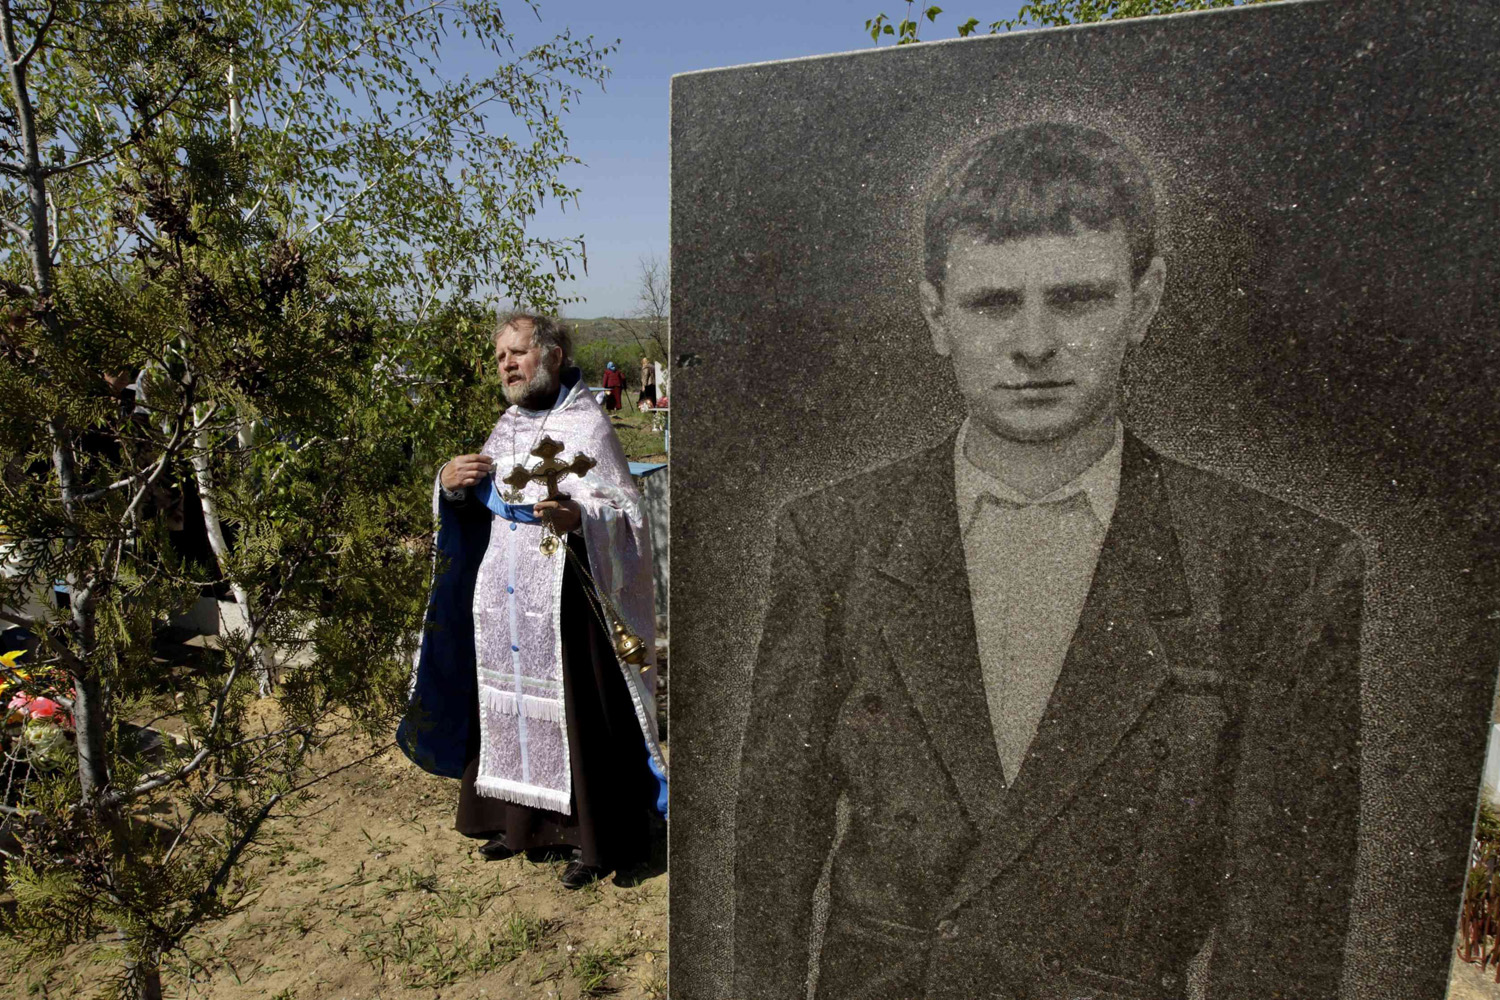 An Orthodox priest walks past a portrait of a man on a grave, as he conducts a service in a cemetery near the village of Zimogorie